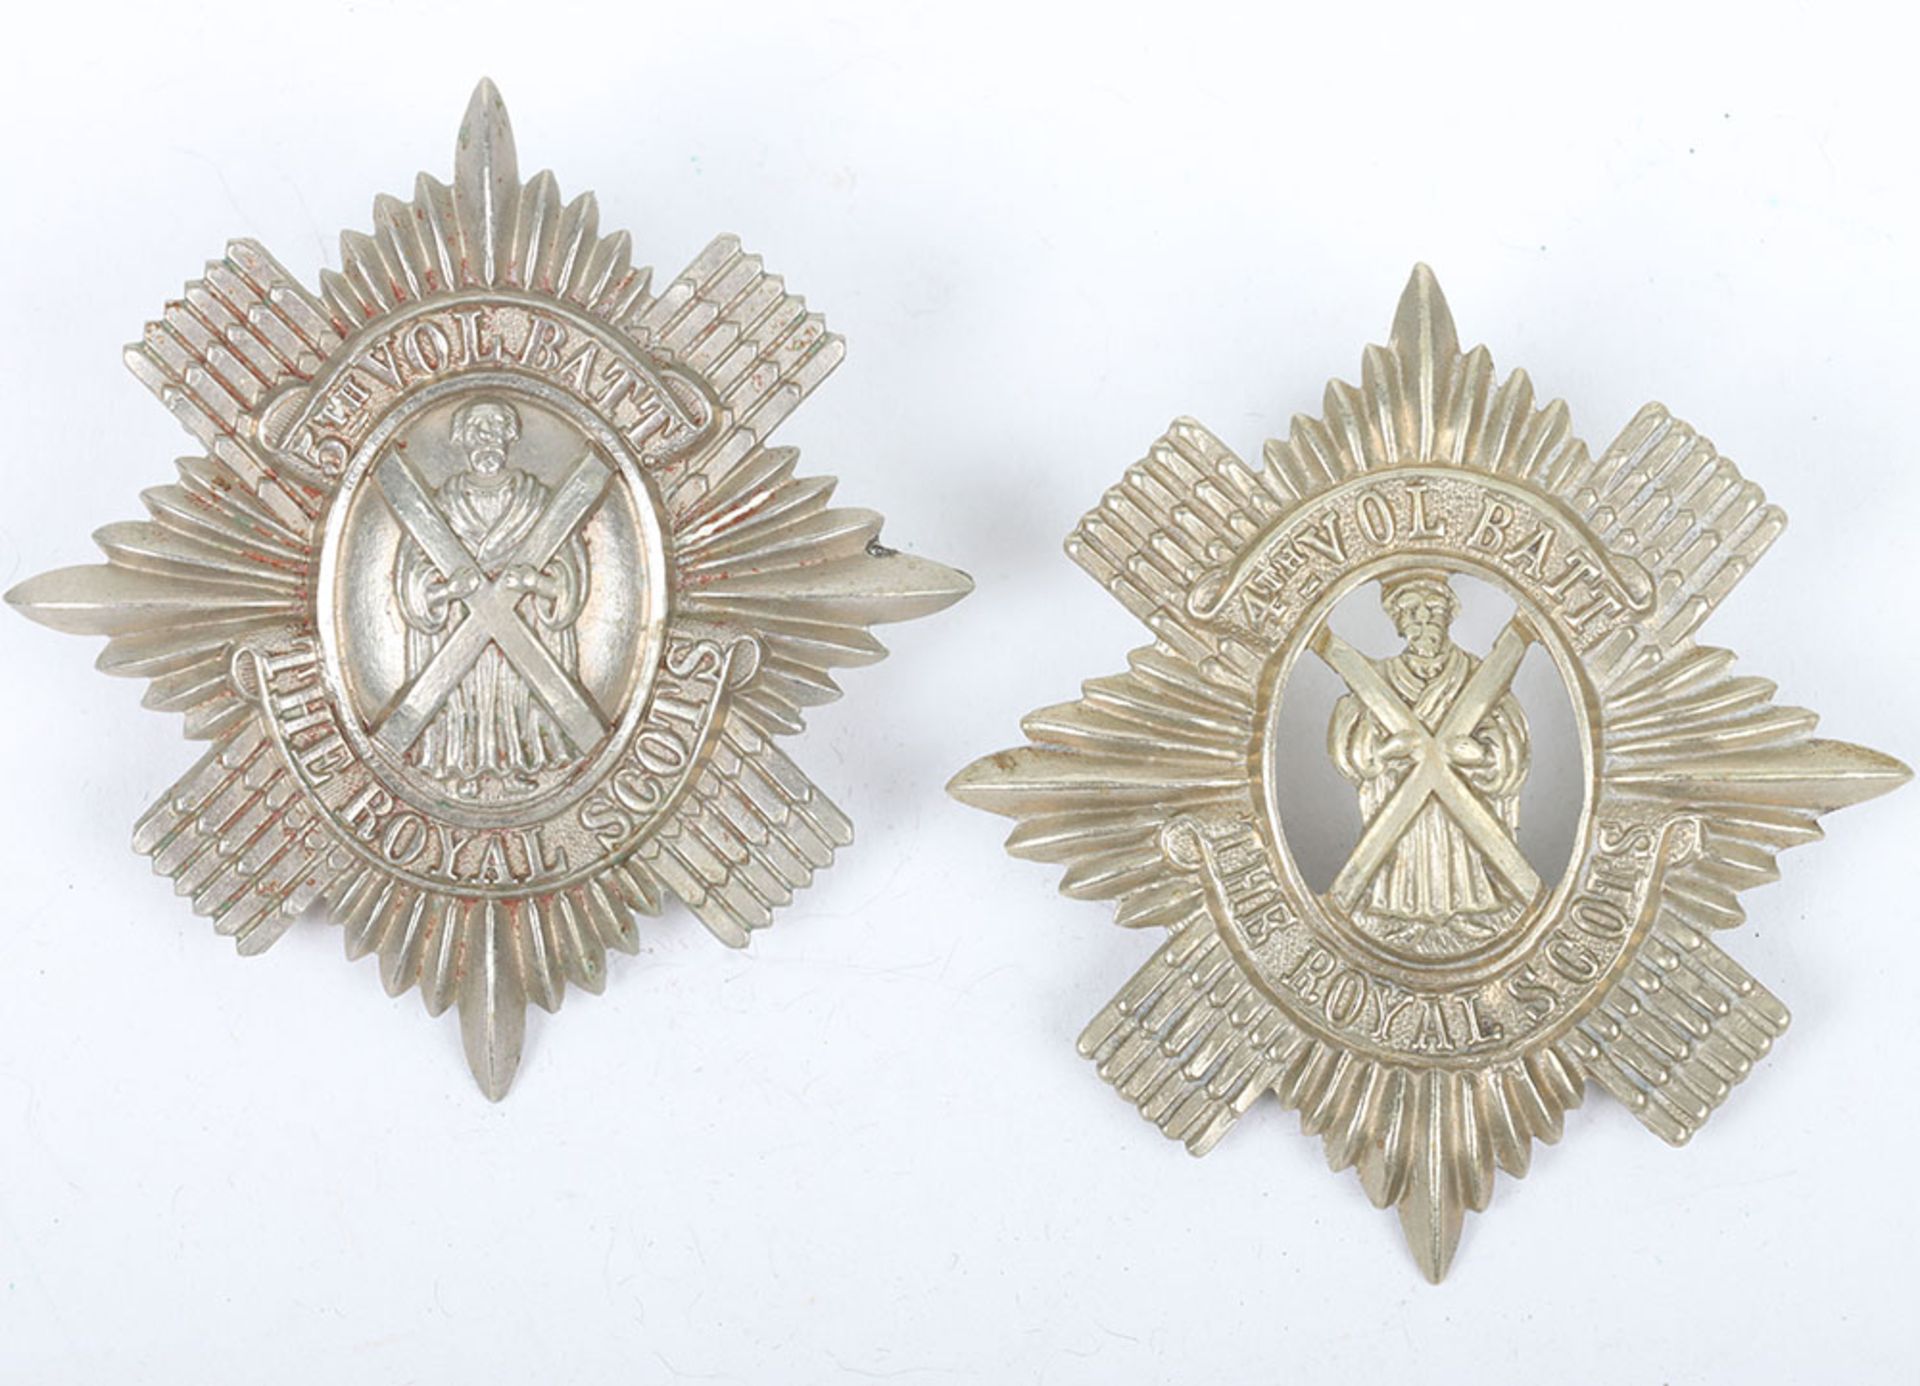 4th & 5th Volunteer Battalion The Royal Scots Glengarry Badges